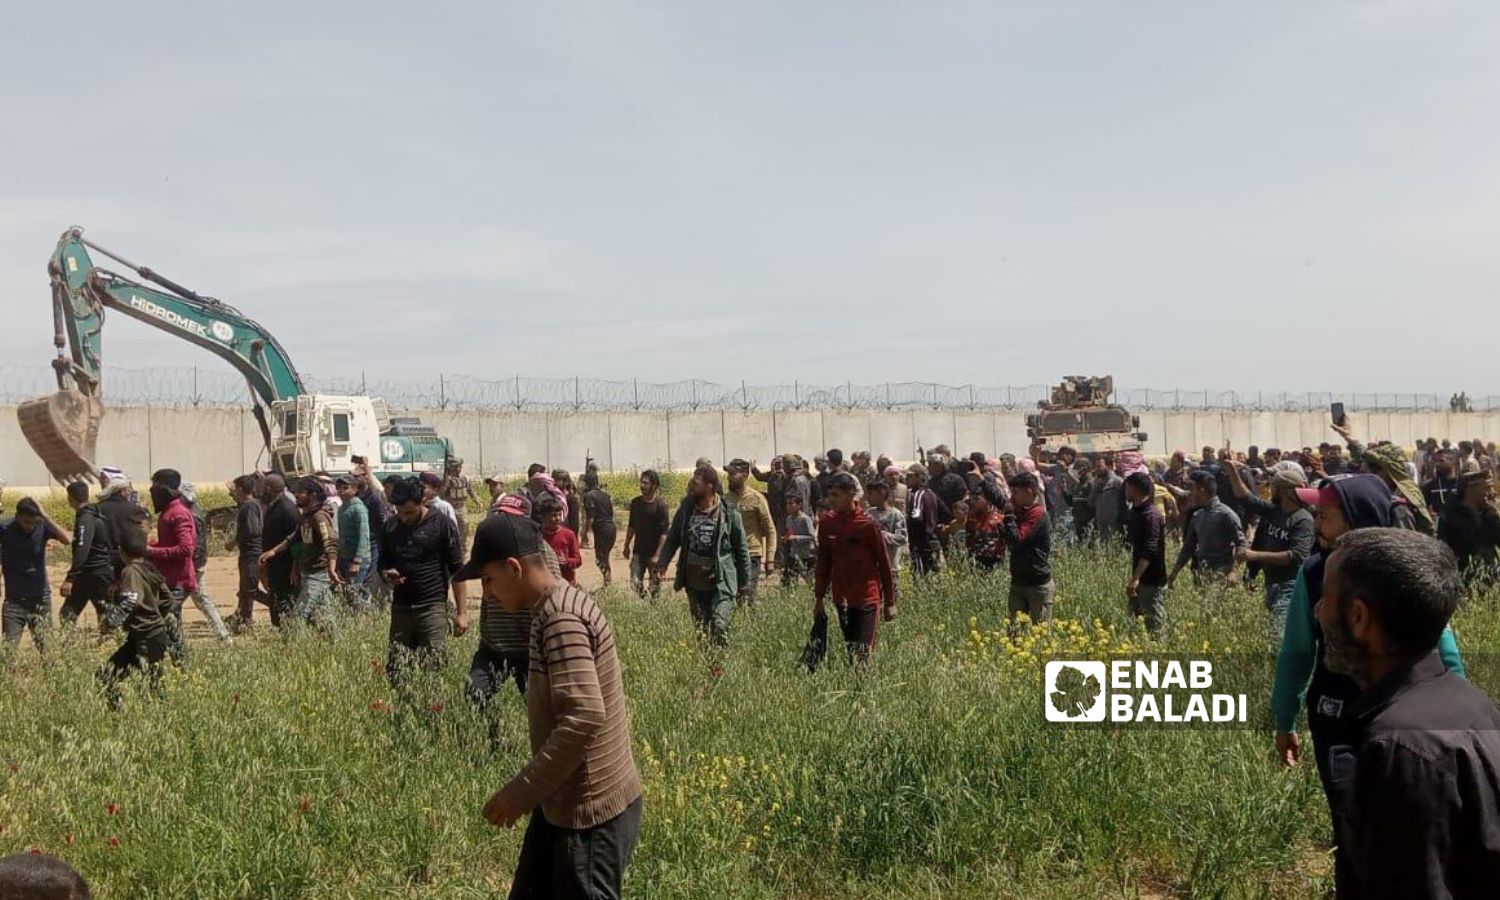 Farmers protest against the digging of a military trench within their land in the countryside of Ras al-Ain, northeastern Syria - April 18, 2023 (Enab Baladi/Hussein Shaabo)